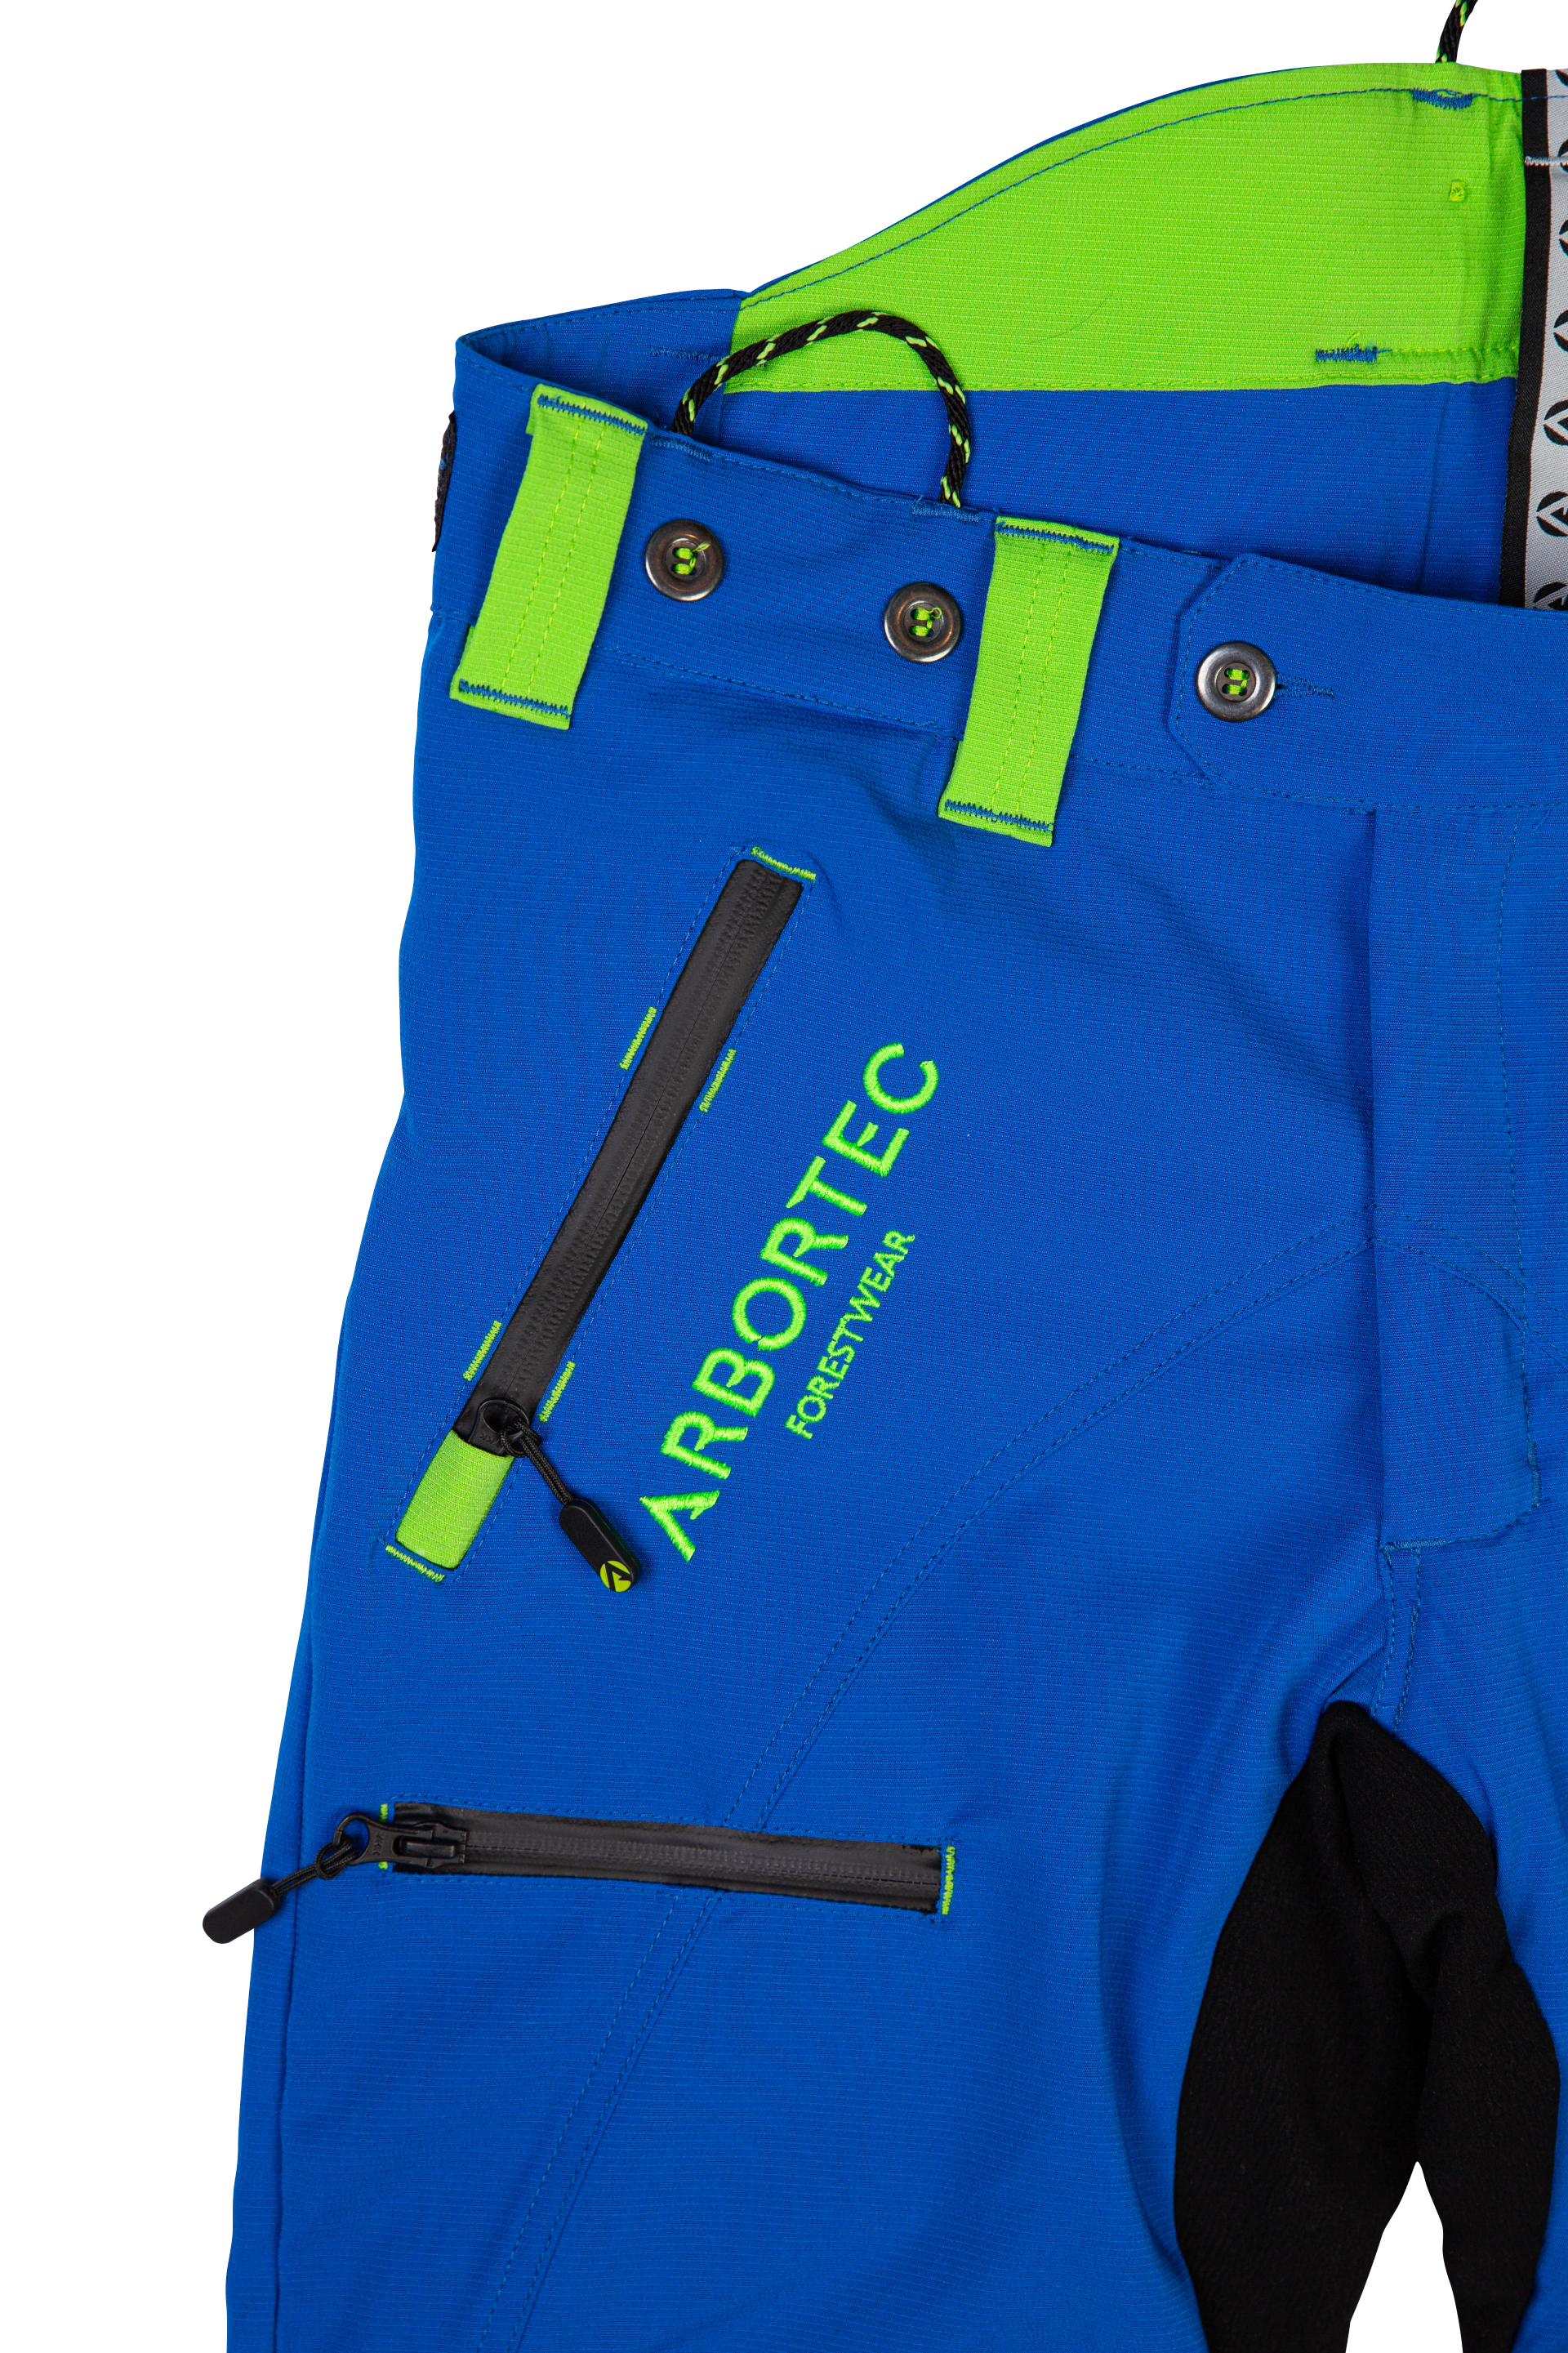 AT4060(US) Breatheflex Pro Chainsaw Trousers UL Rated - Blue